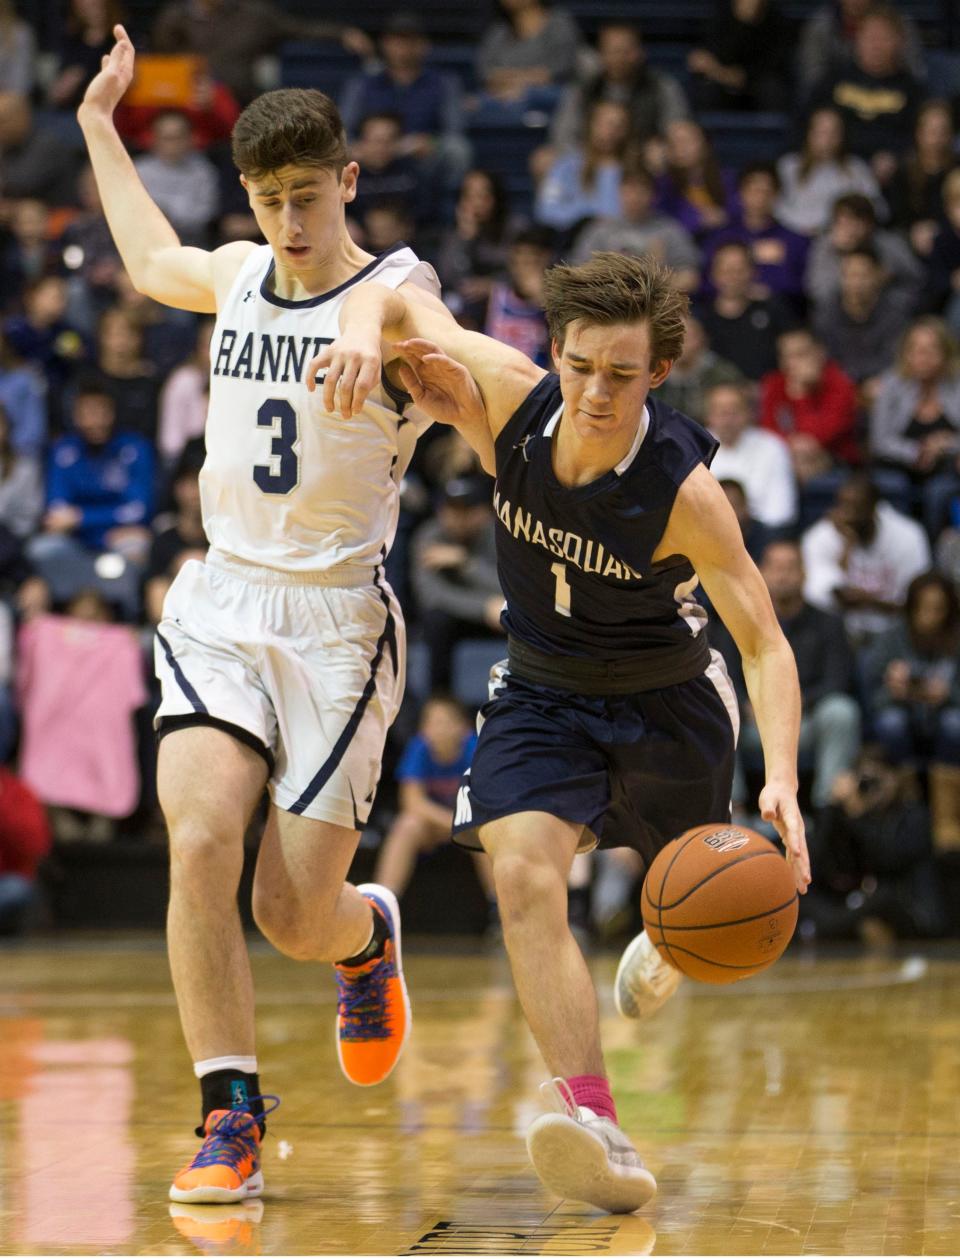 Ranney School defeats Manasquan in the 2019 Shore Conference Tournament final held at Monmouth University. Ranney's Alex Klatsky and Manaquan's Kieran Flanagan battle for the ball in the second half.West Long Branch, NJSaturday, February 23, 2019